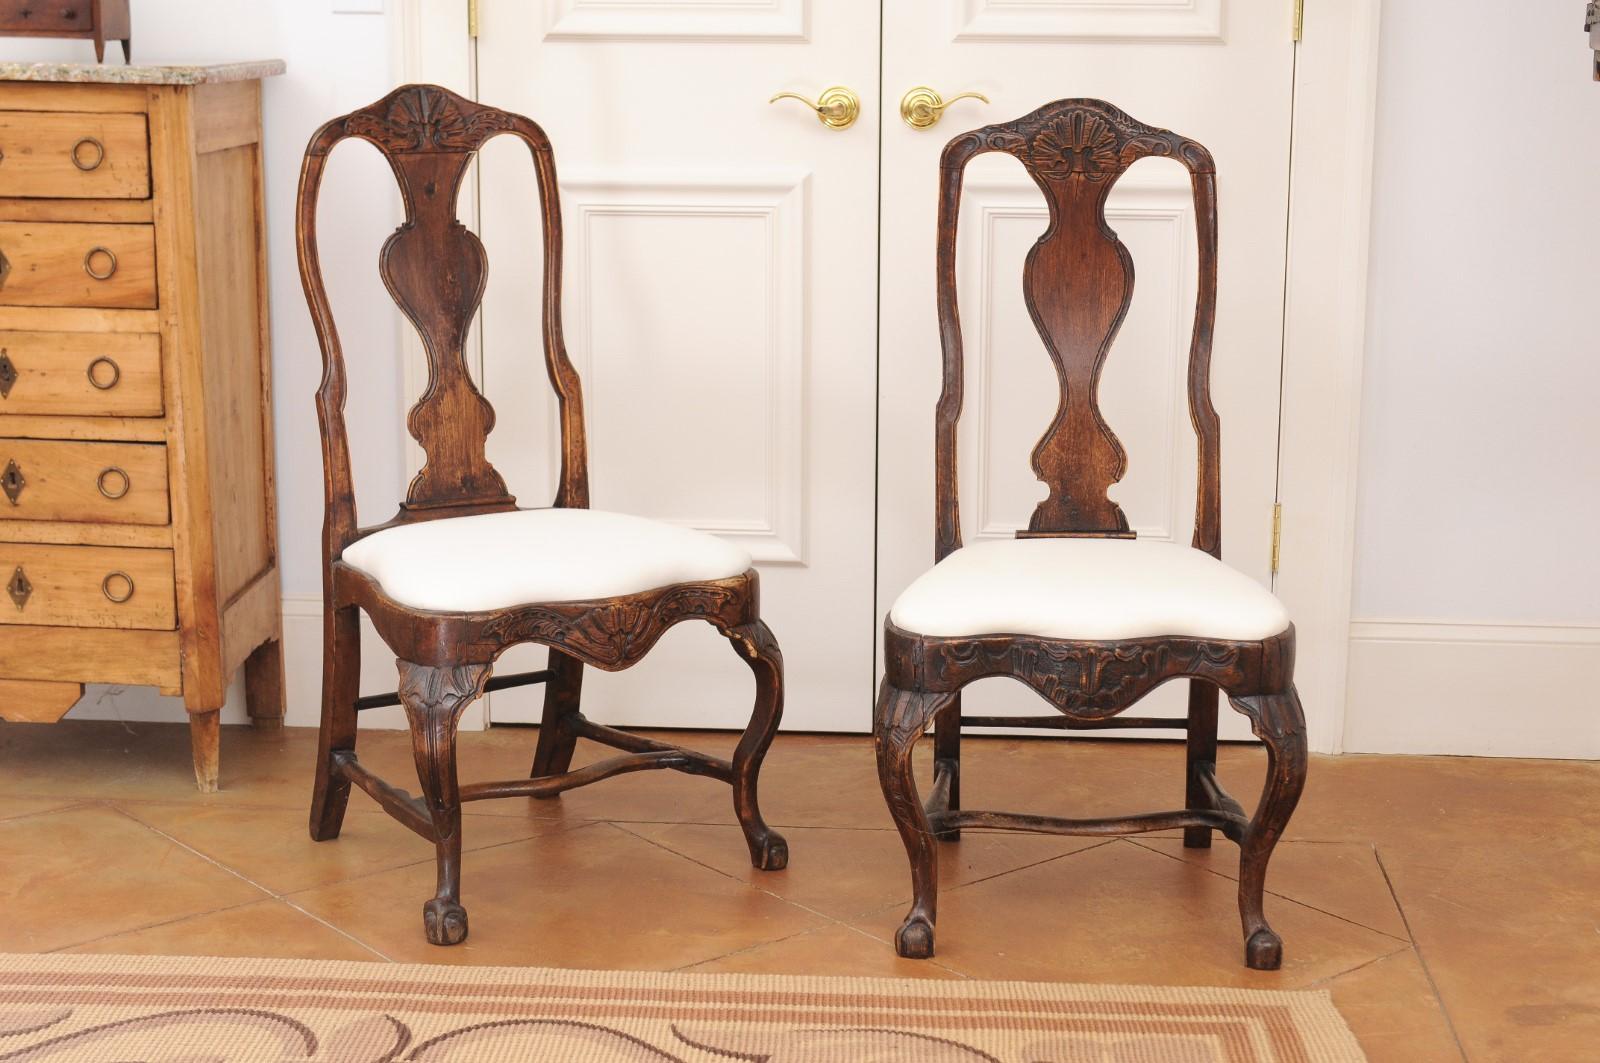 A pair of Swedish Rococo period walnut side chairs from the 18th century, with upholstery and cabriole legs. Created in Sweden during the 18th century, each of this pair of Rococo chairs features a curving pierced back with carved splat, sitting